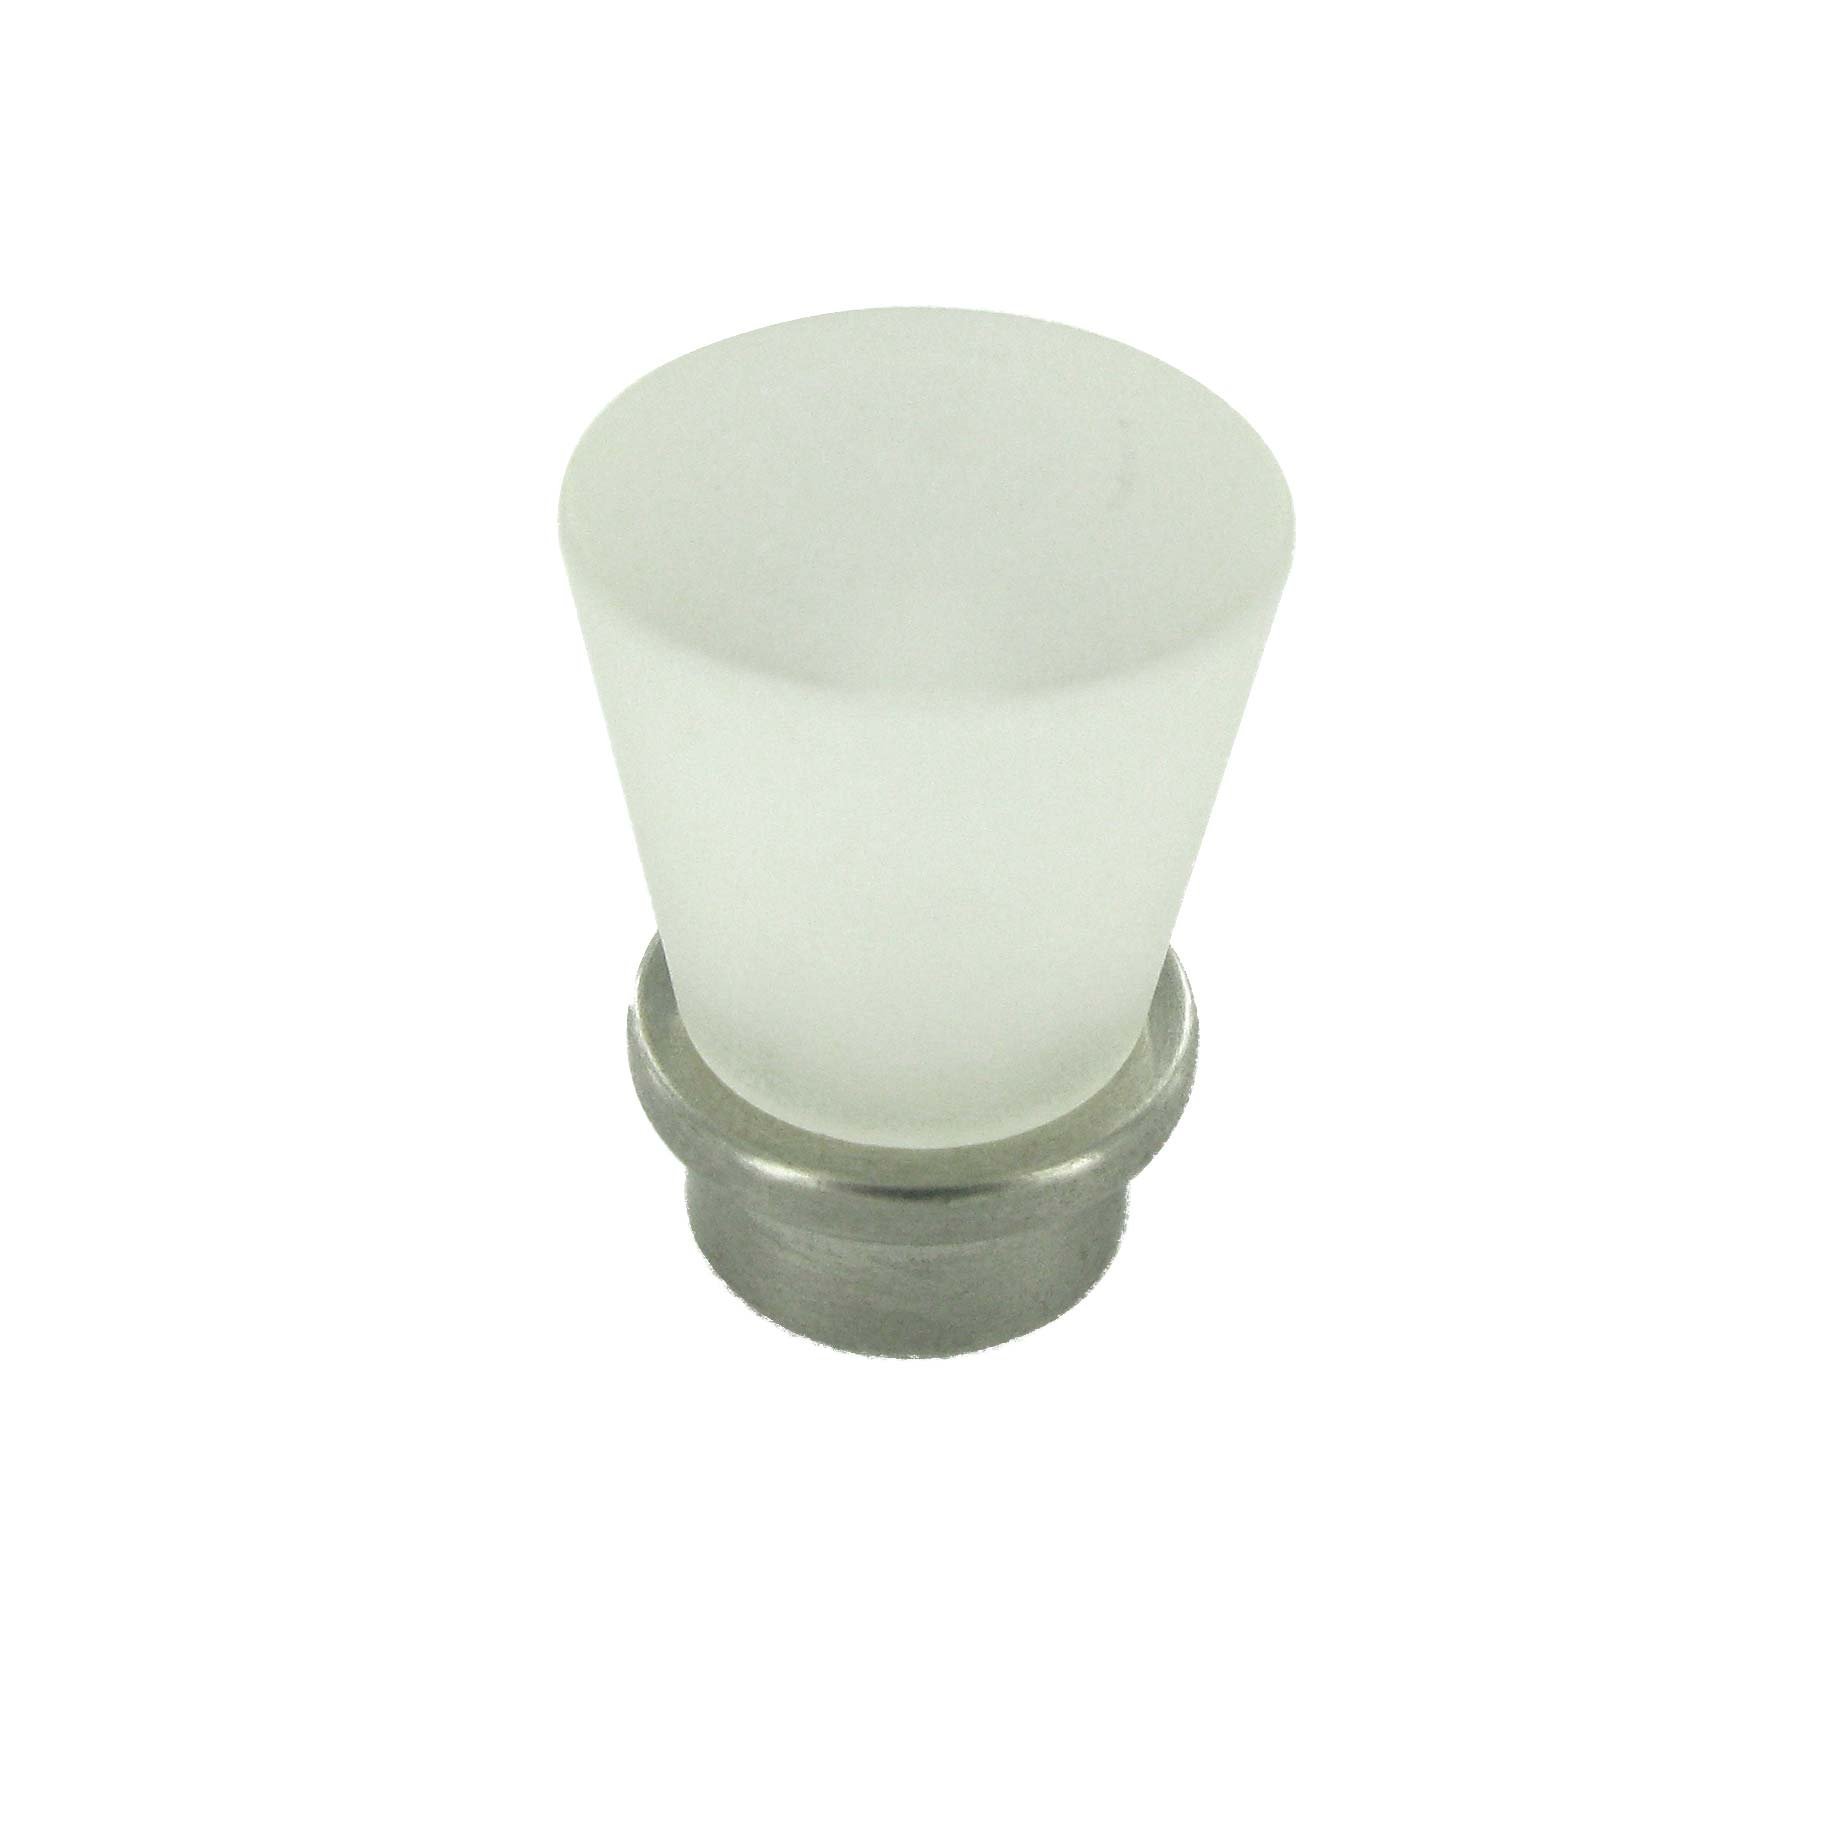 Richelieu 3/4" Diameter Metacryl Knob in Brushed Nickel and Frosted Clear